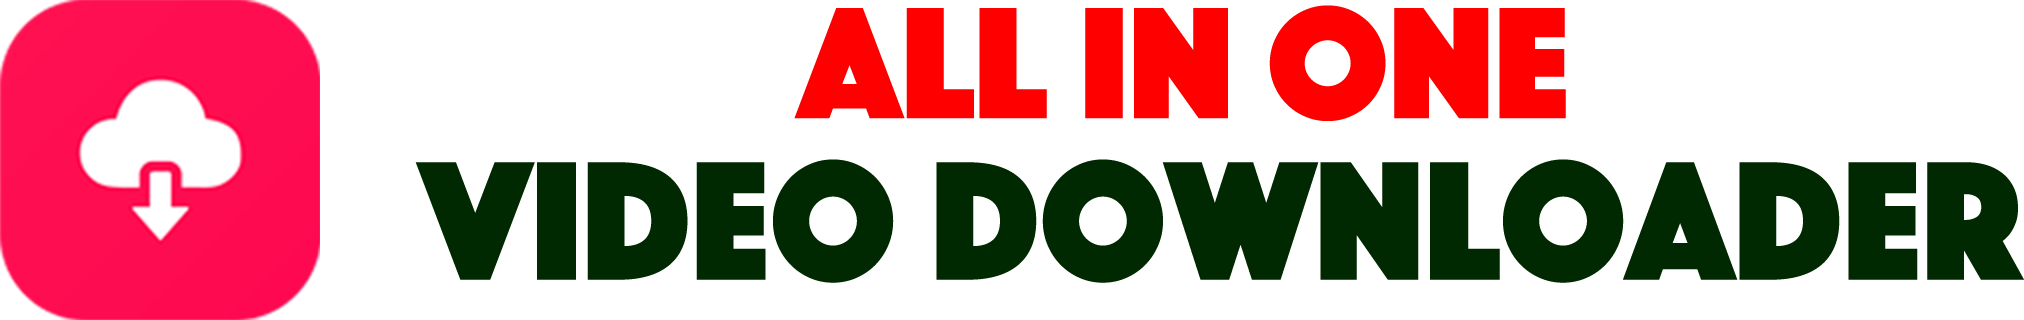 All In One Video Downloader logo